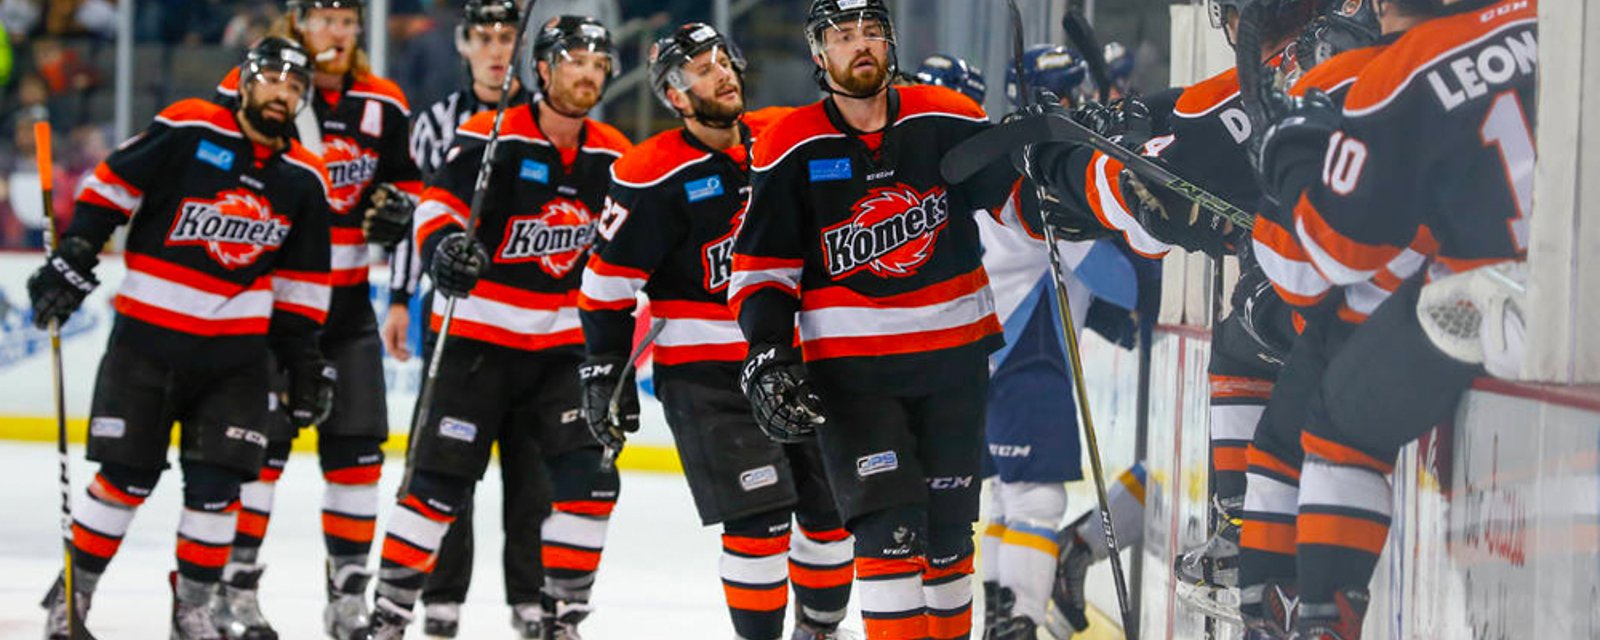 ECHL'S Komets rocked by serious allegations of fraud